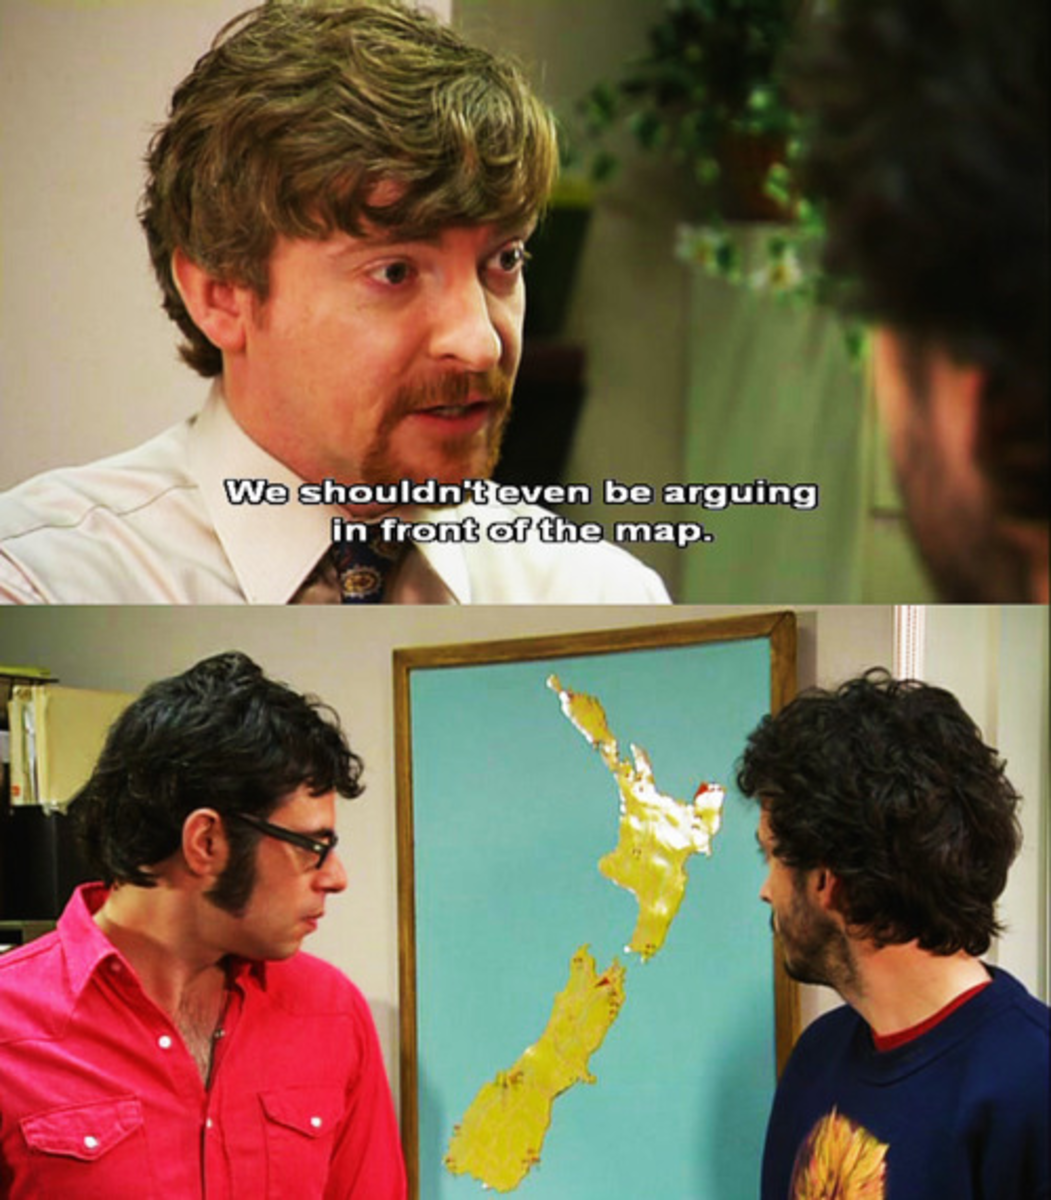 reasons-why-we-miss-flight-of-the-conchords